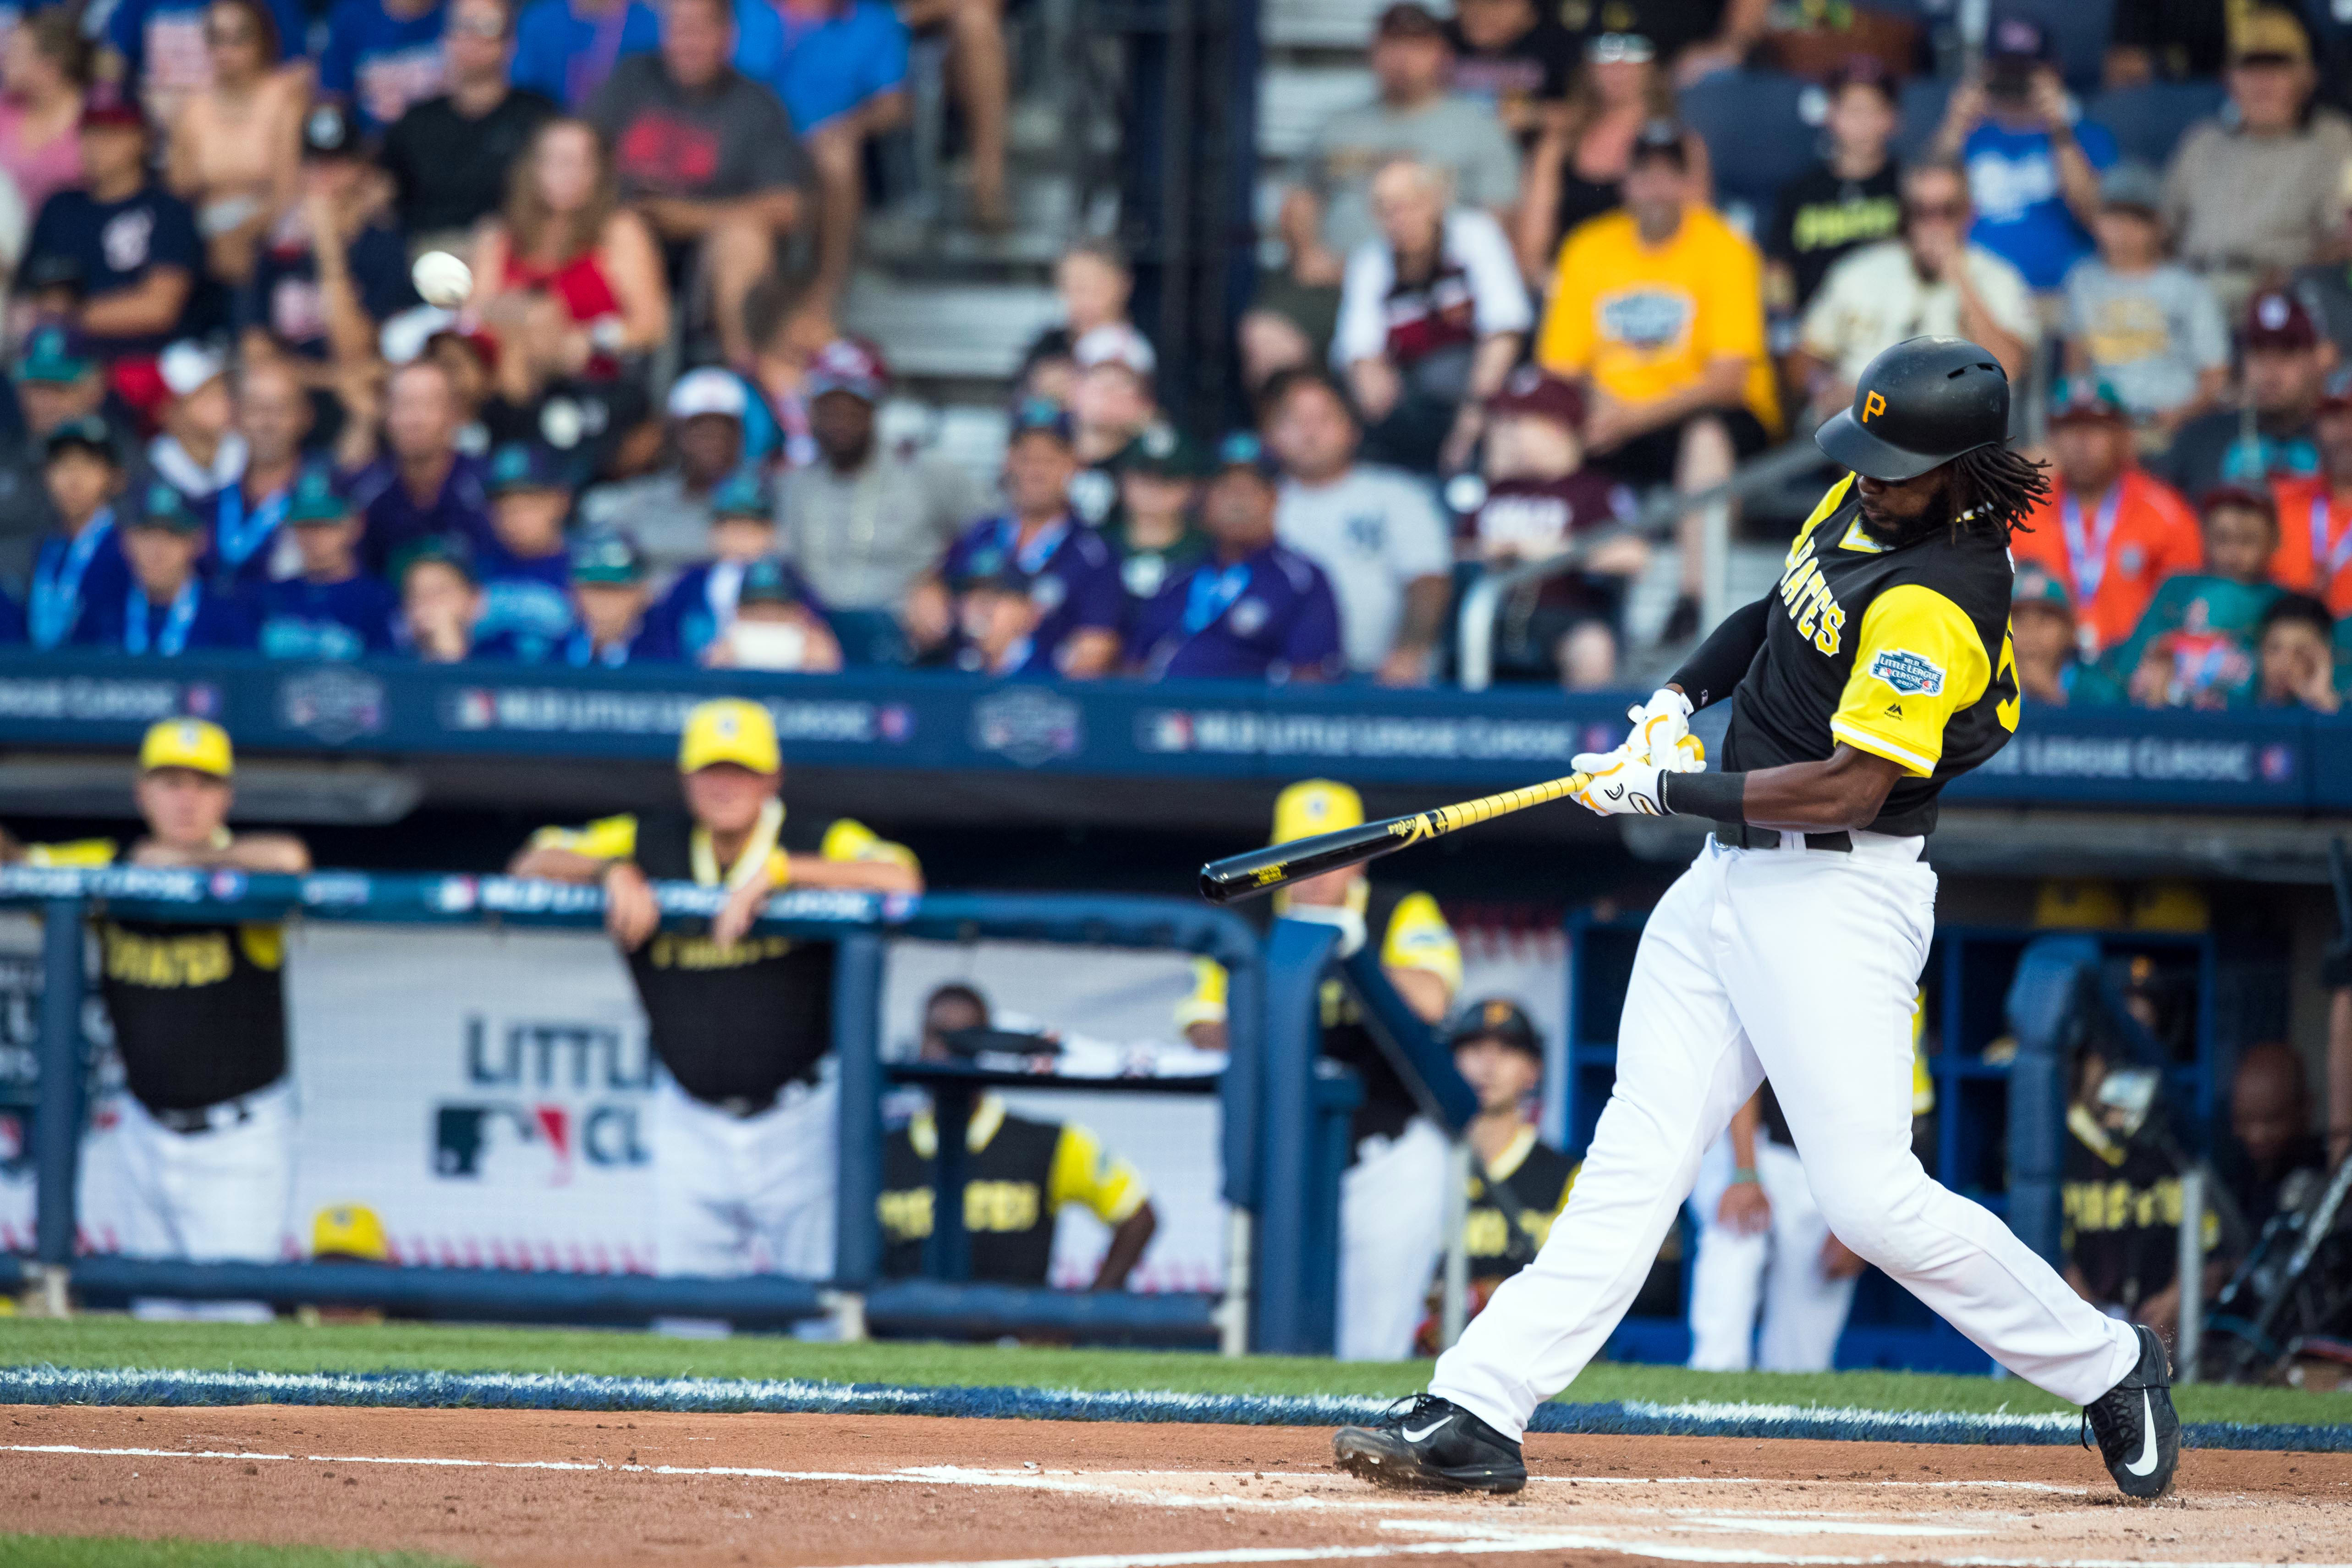 Bell powers Pirates past Cards 6-3 in Little League Classic